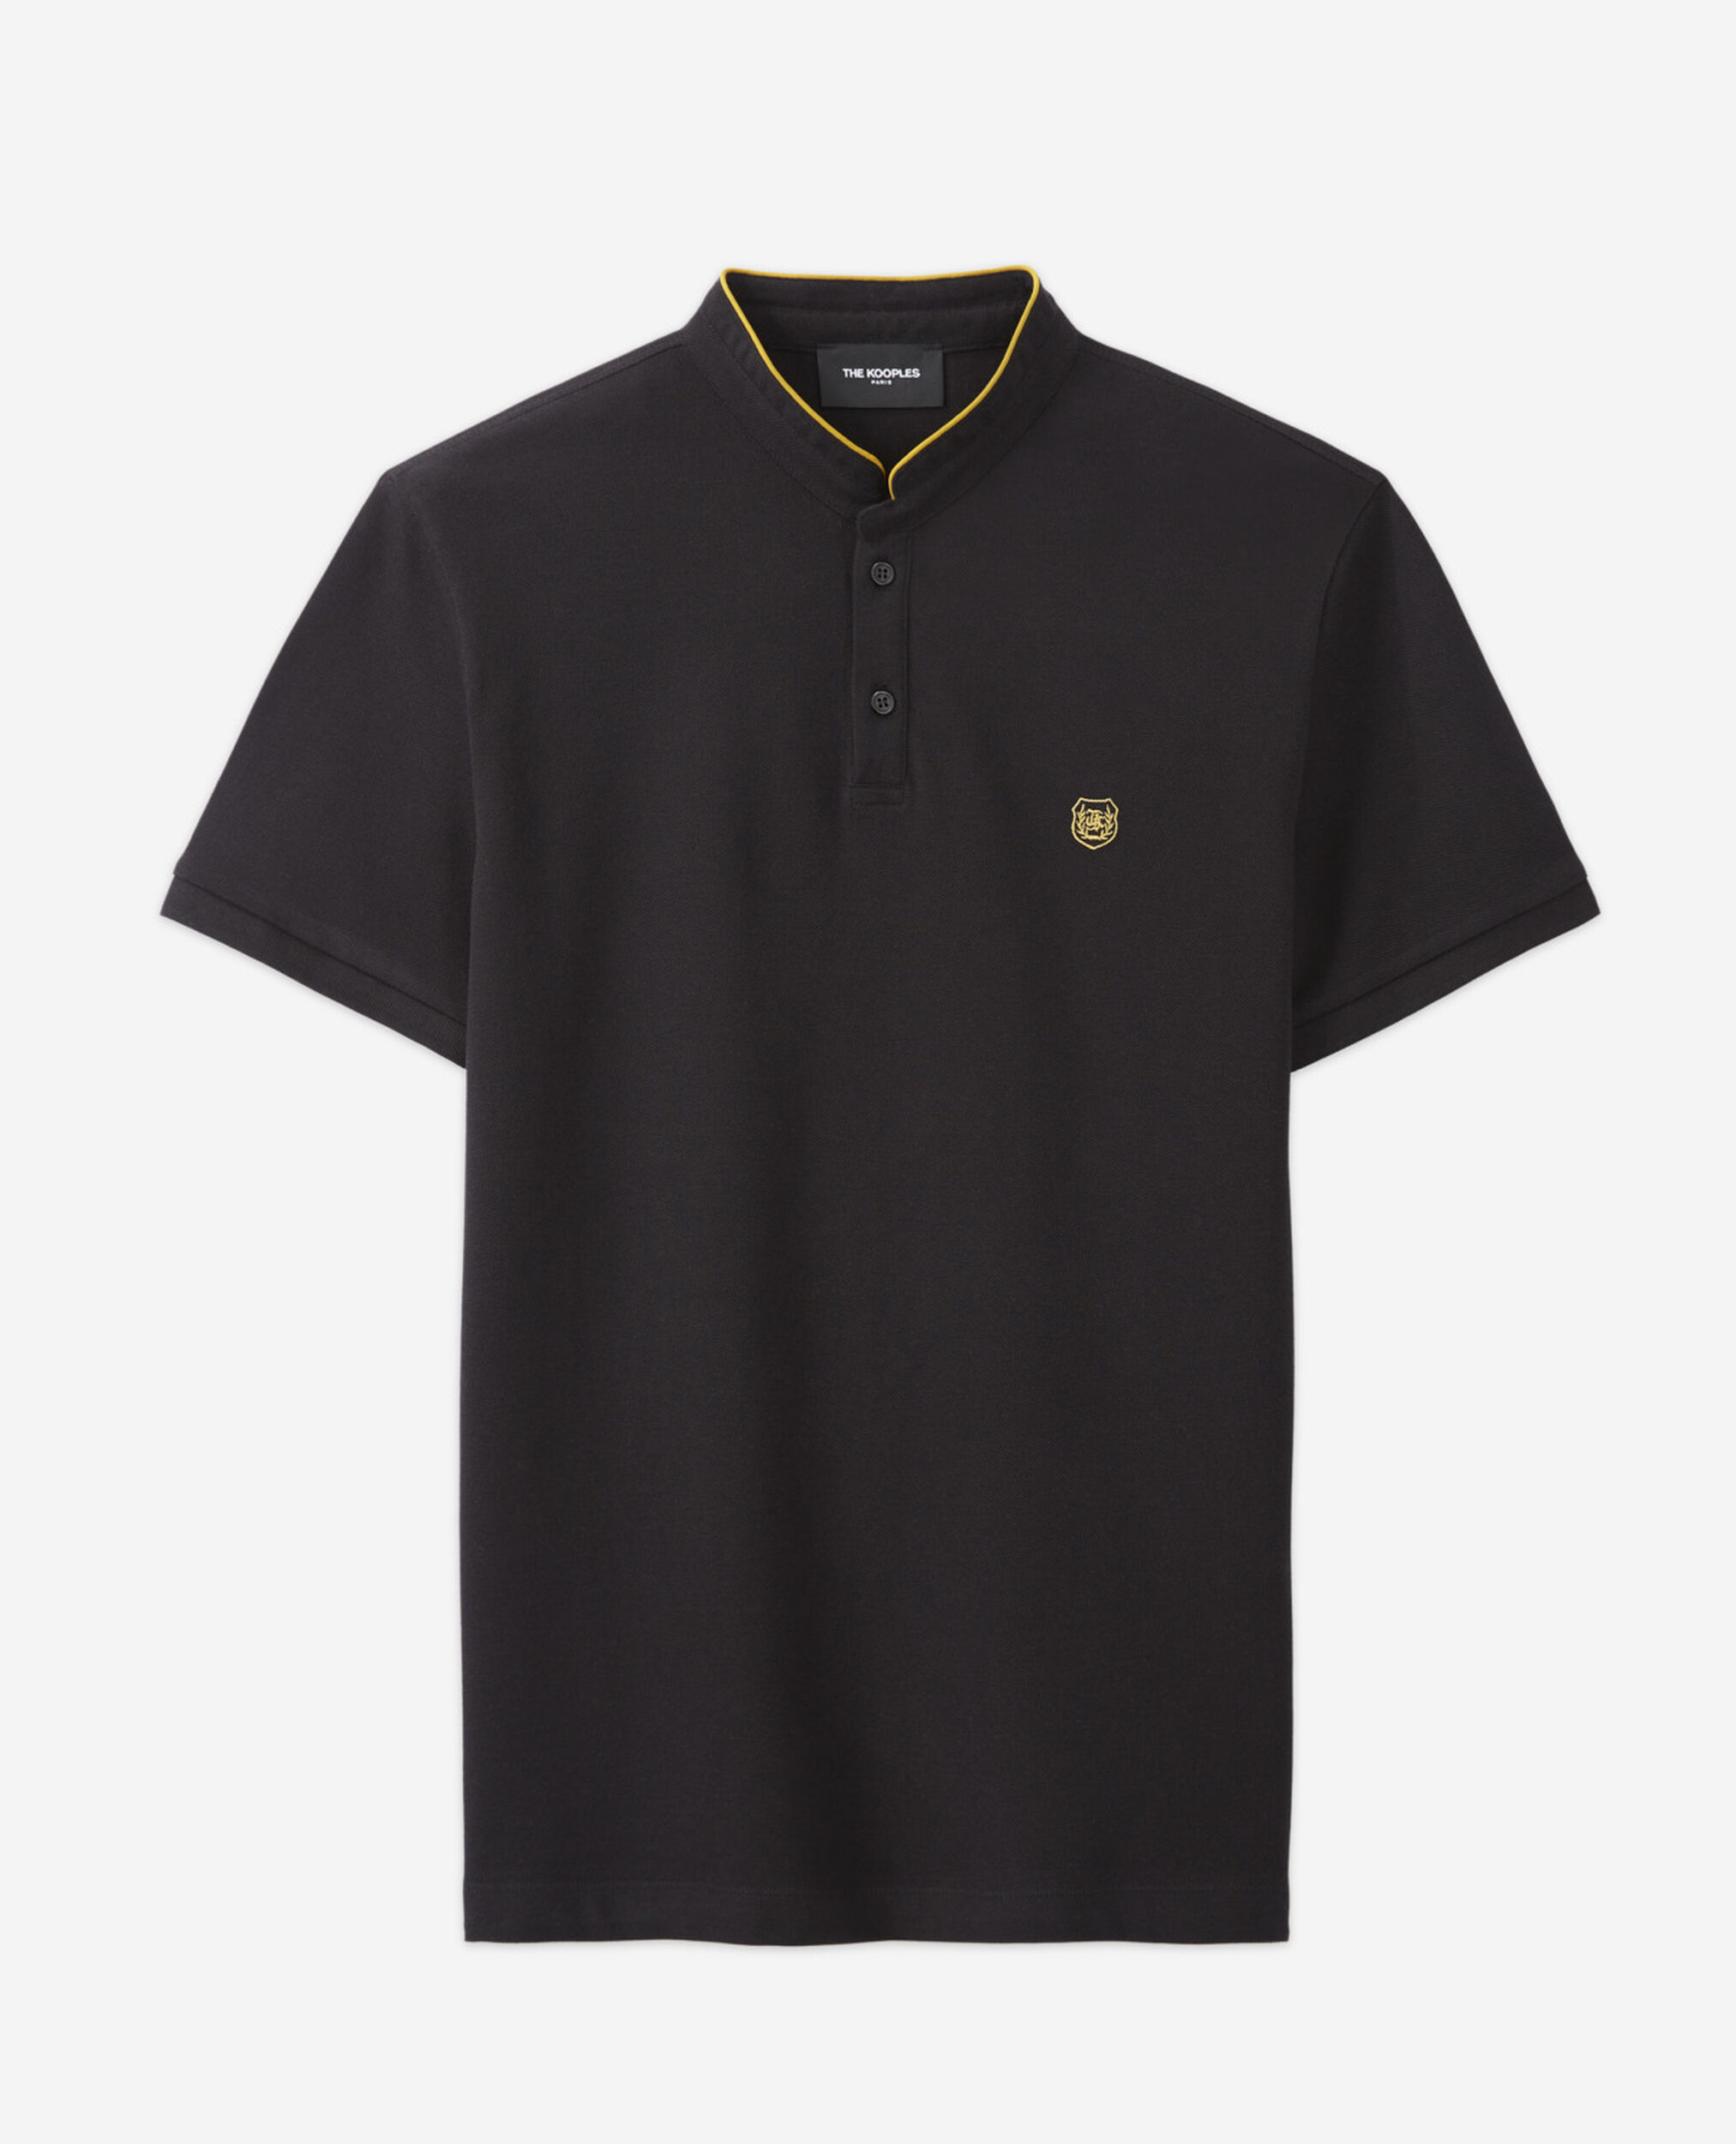 Black polo with officer collar and embroidery, BLACK BROWN, hi-res image number null